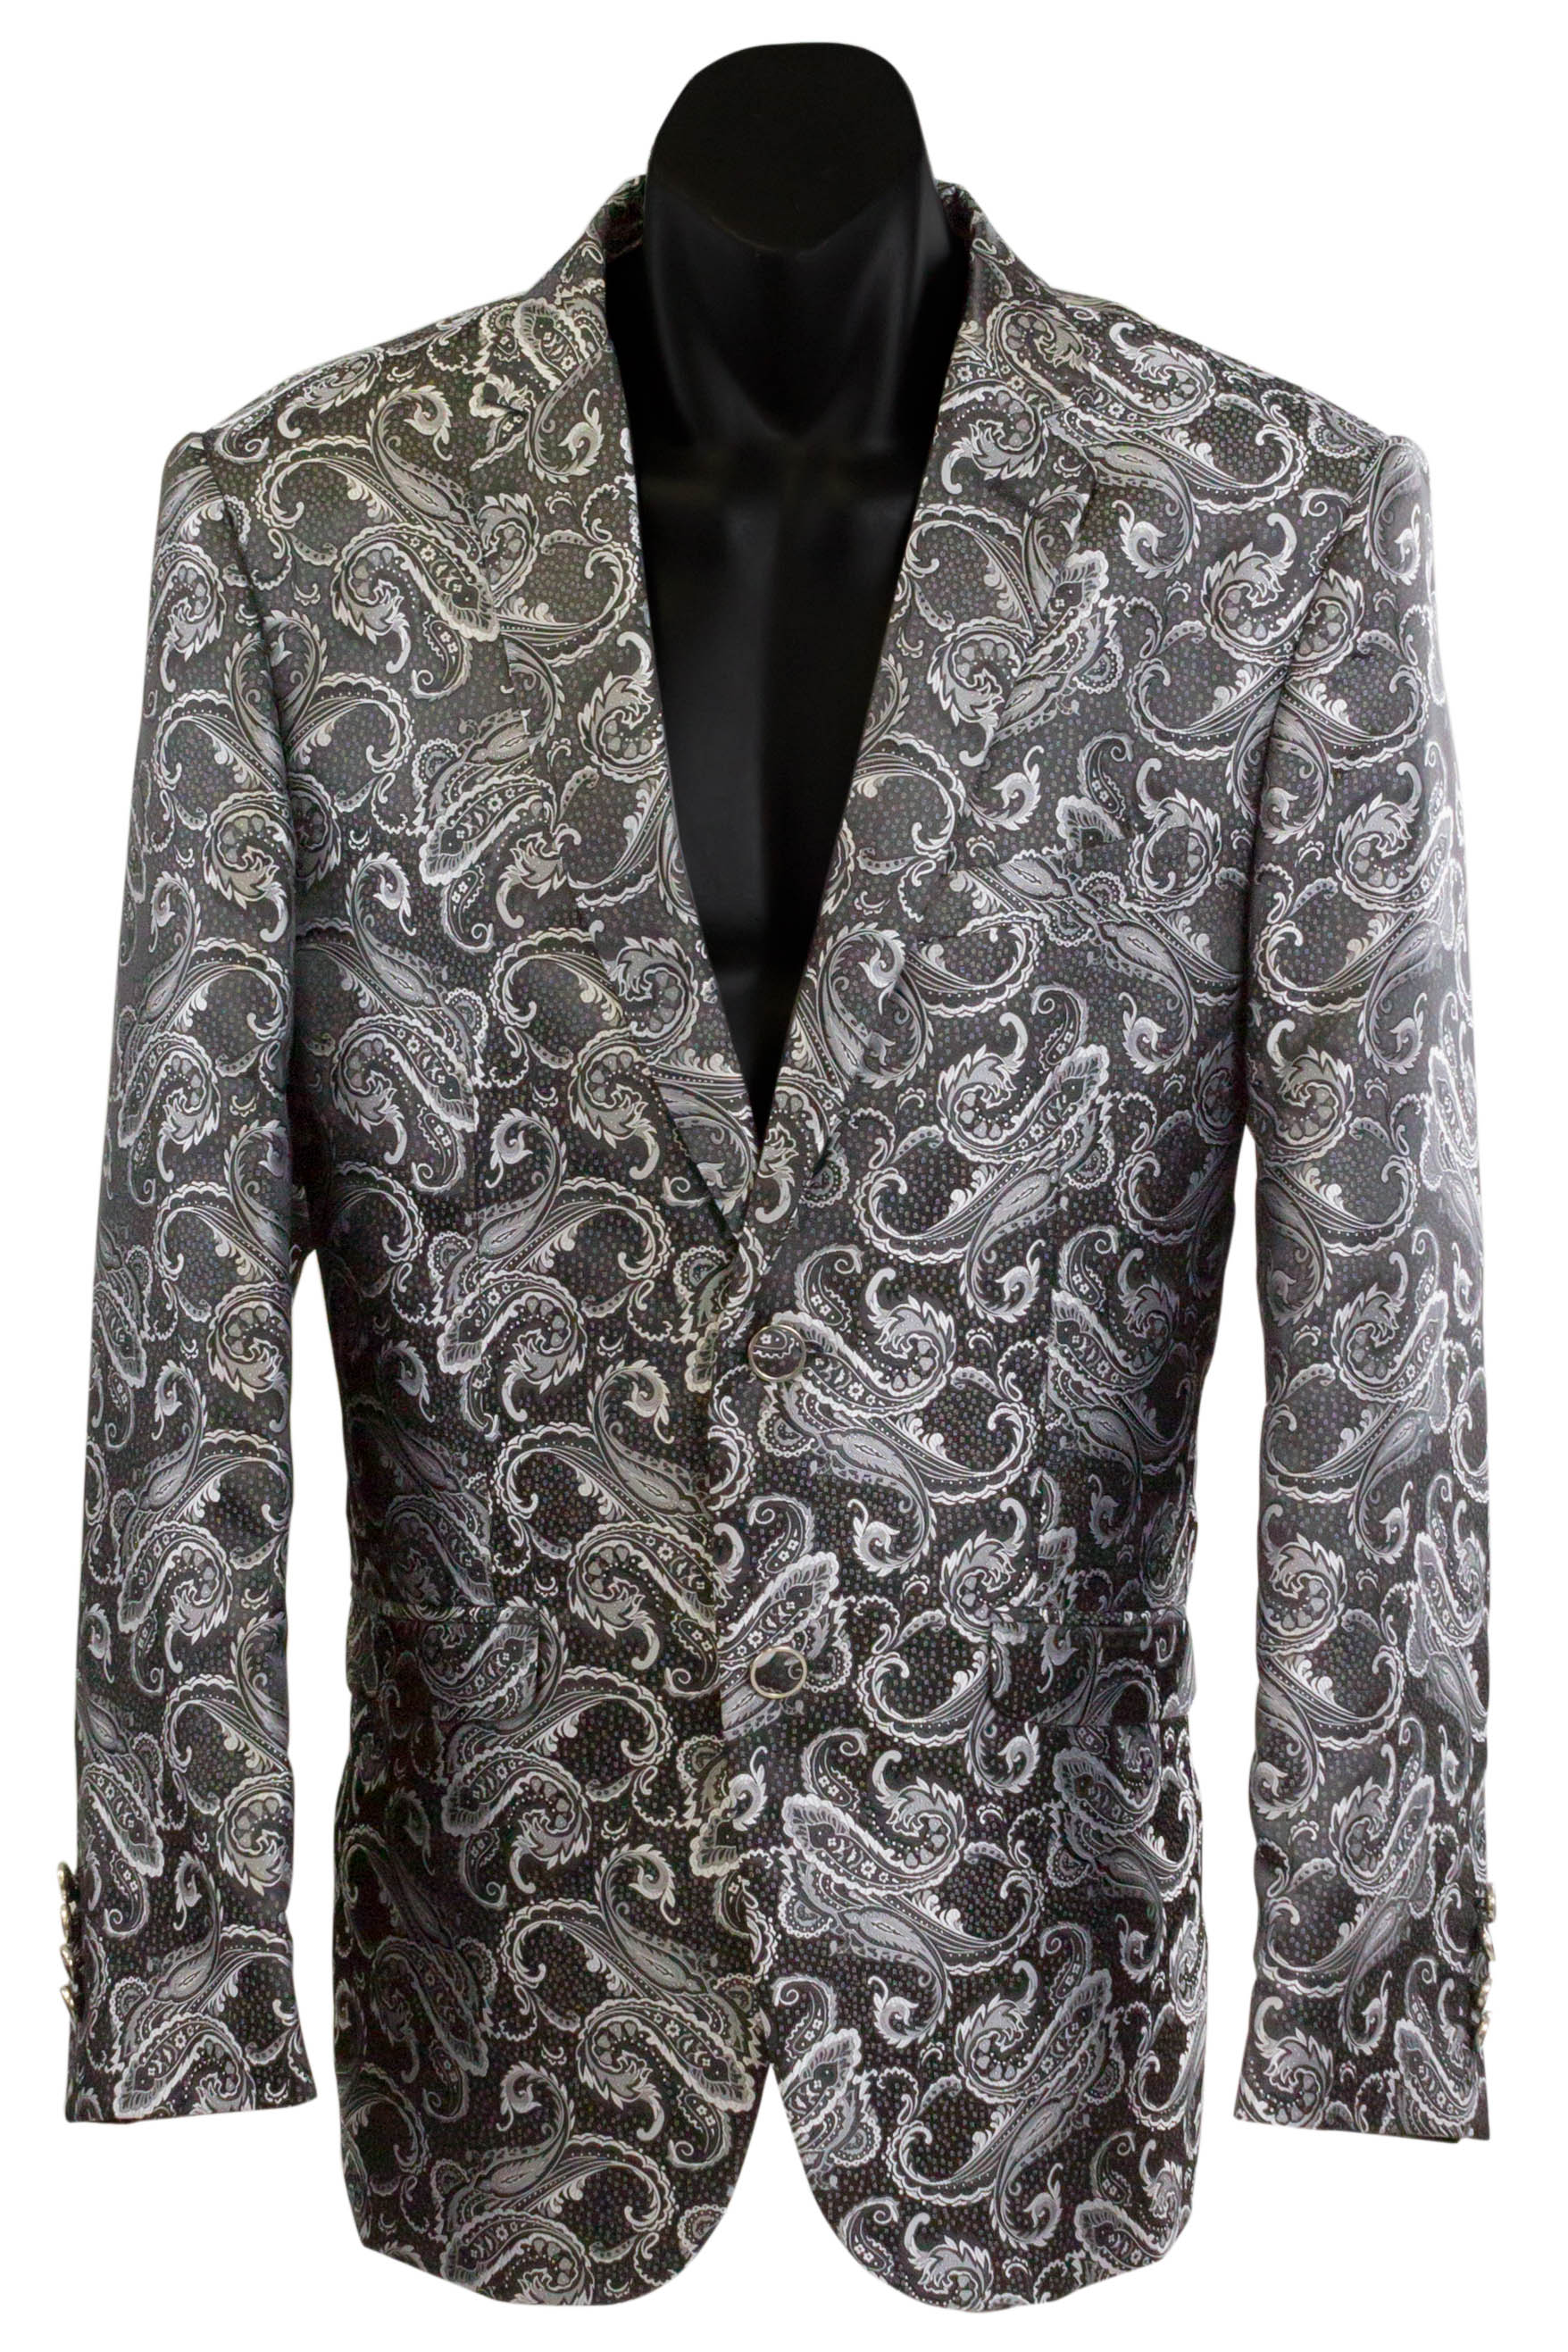 BLACK AND SILVER PAISLEY JACKET - Bello Per Te Suits Tuxedos Jackets